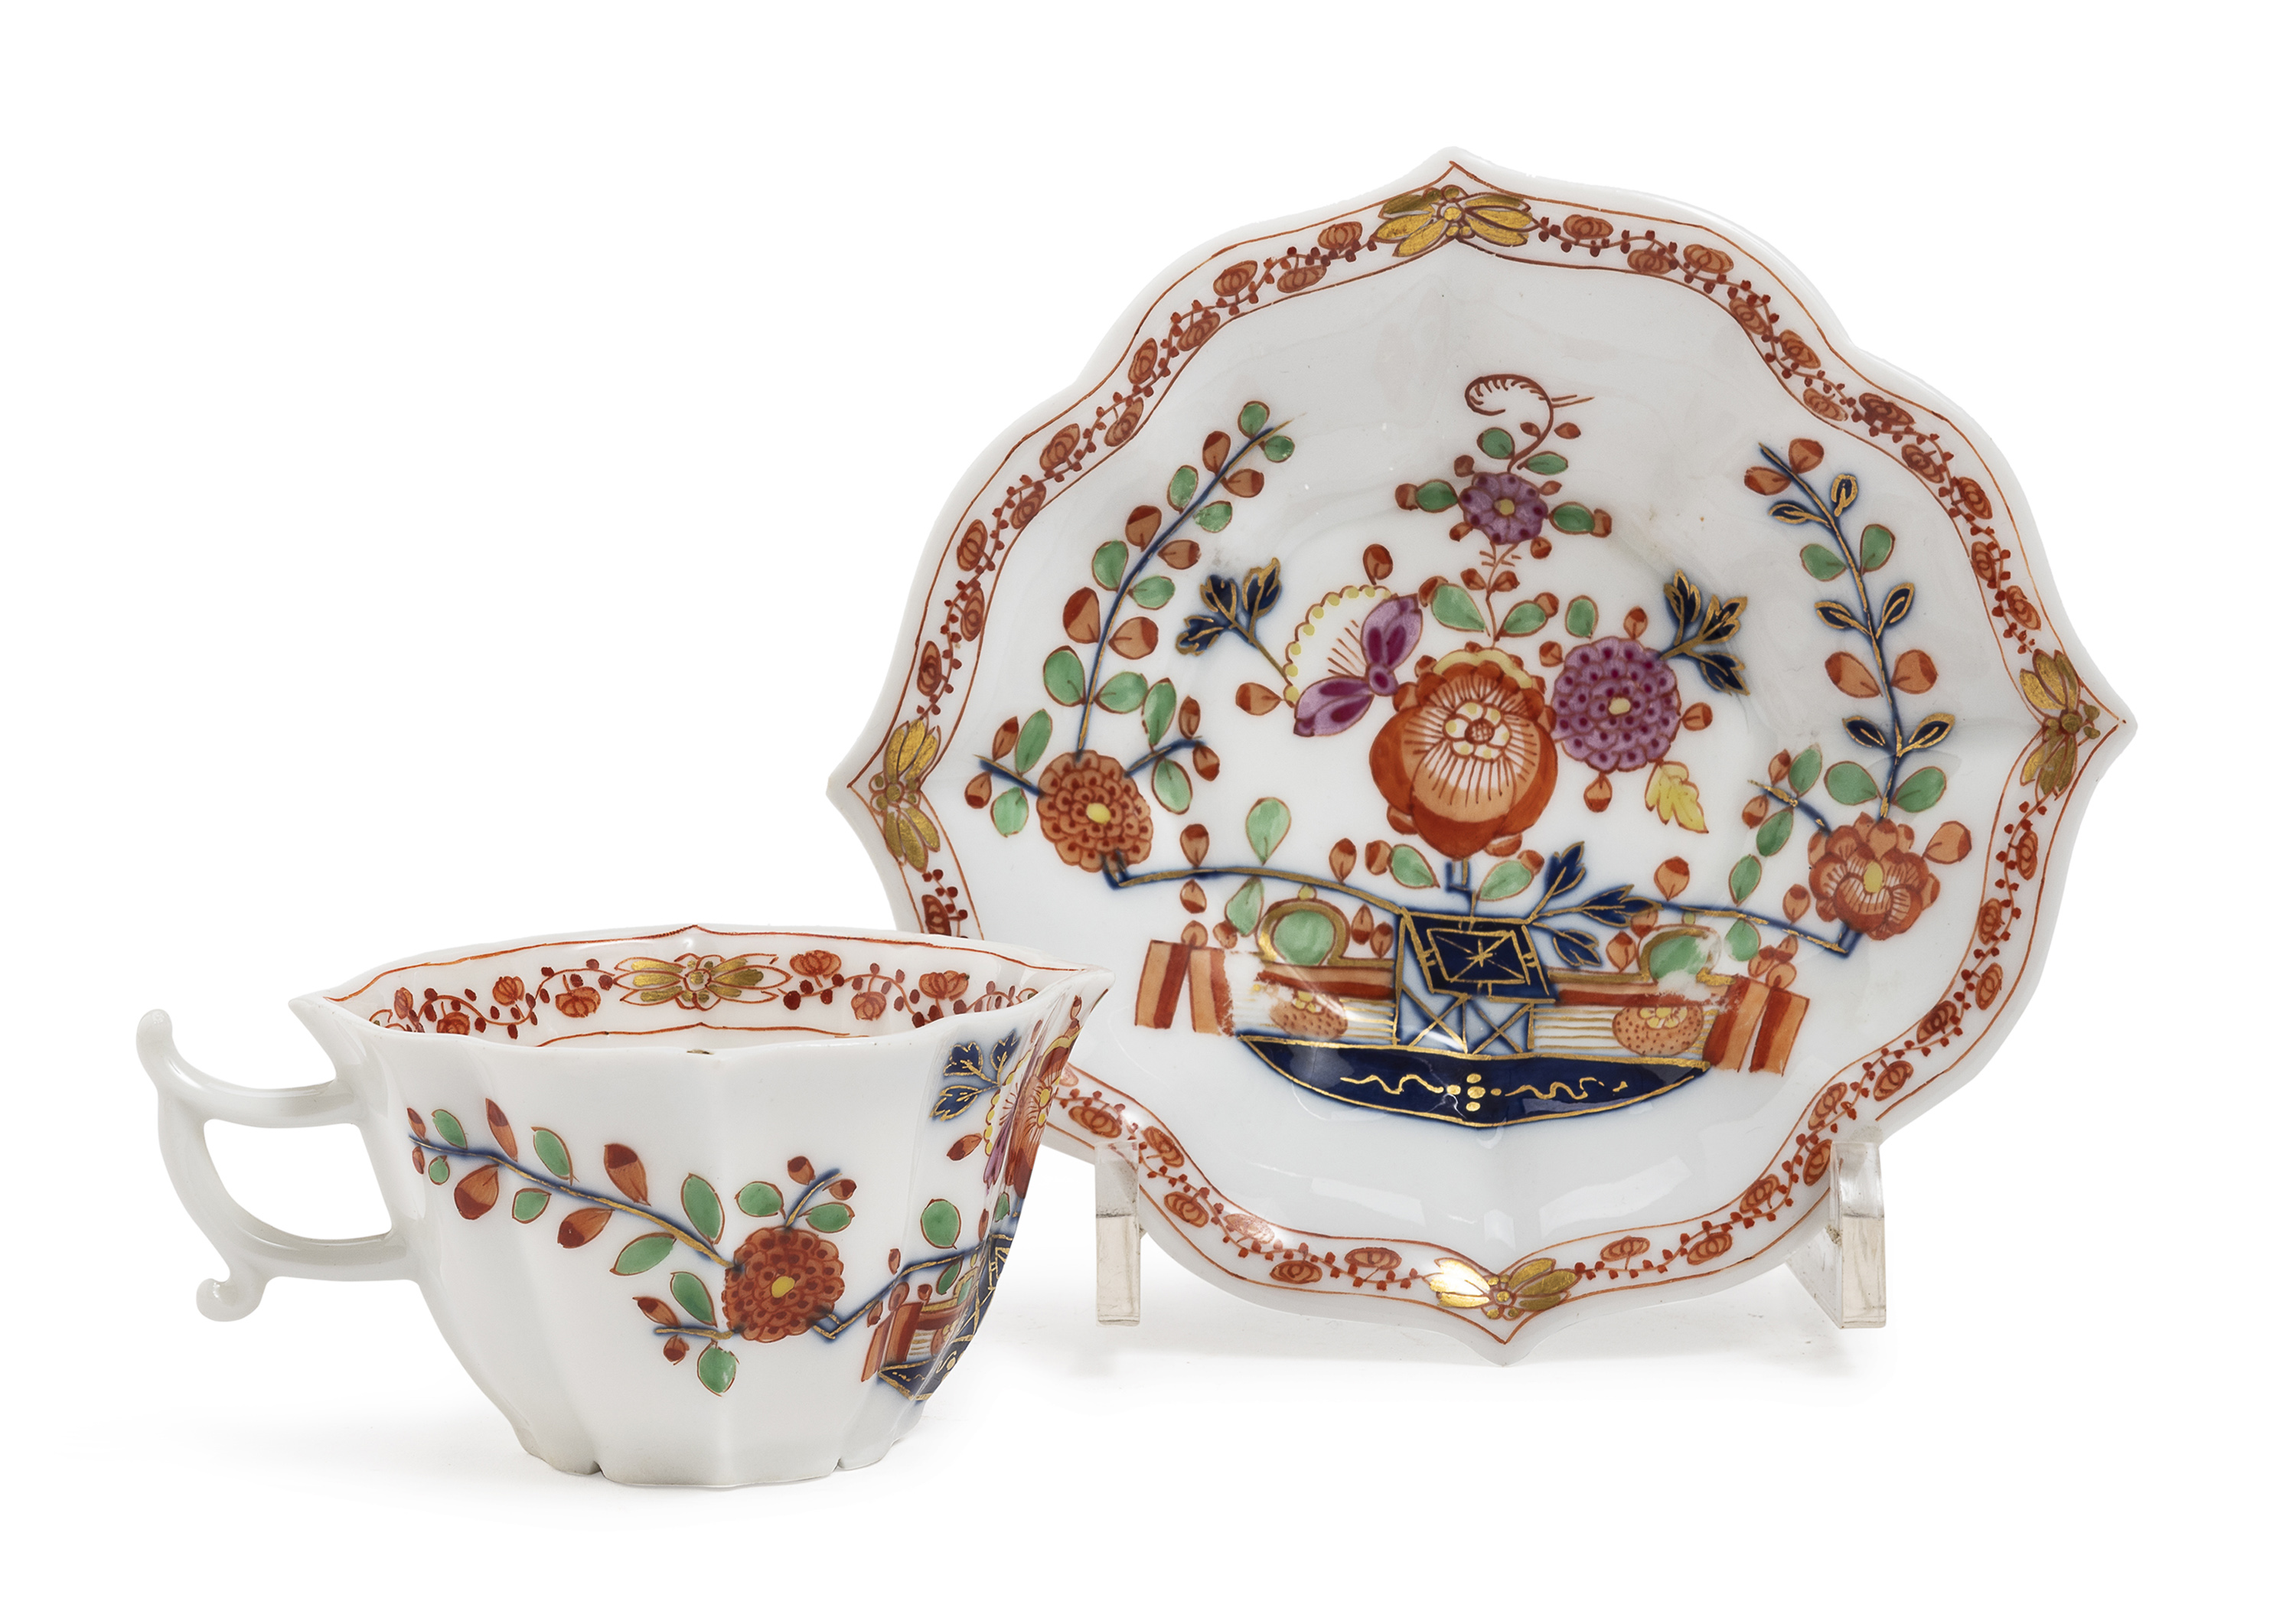 PORCELAIN CUP AND SAUCER MEISSEN 19TH CENTURY